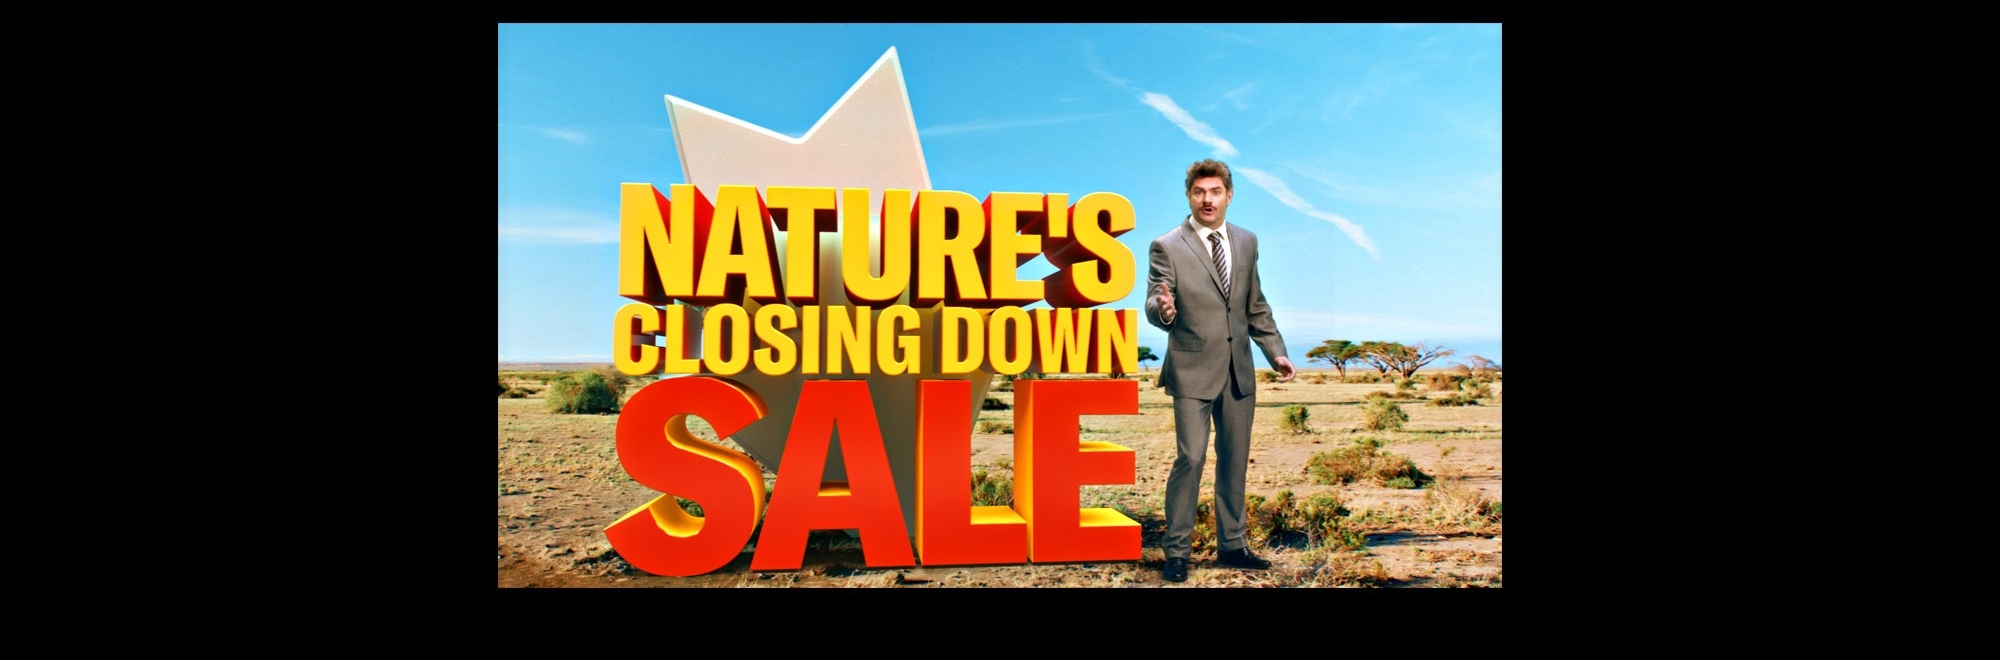 Going, going, gone: Nature's Closing Down Sale from the Born Free Foundation